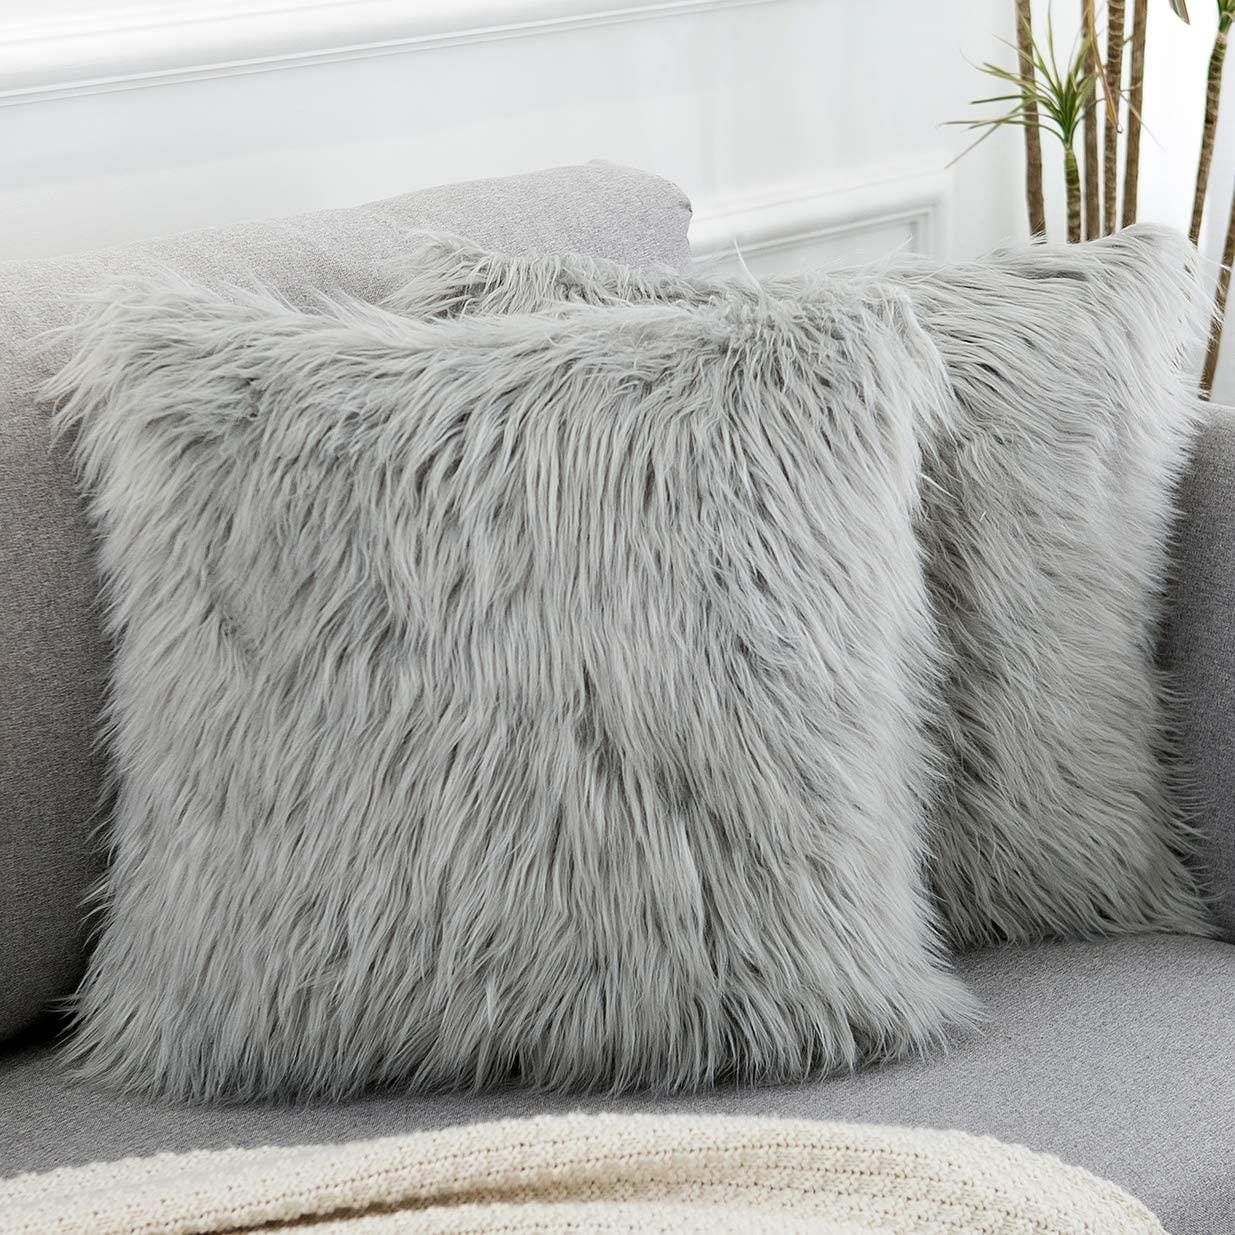 WLNUI Light Gray Decorative Pillow Covers 